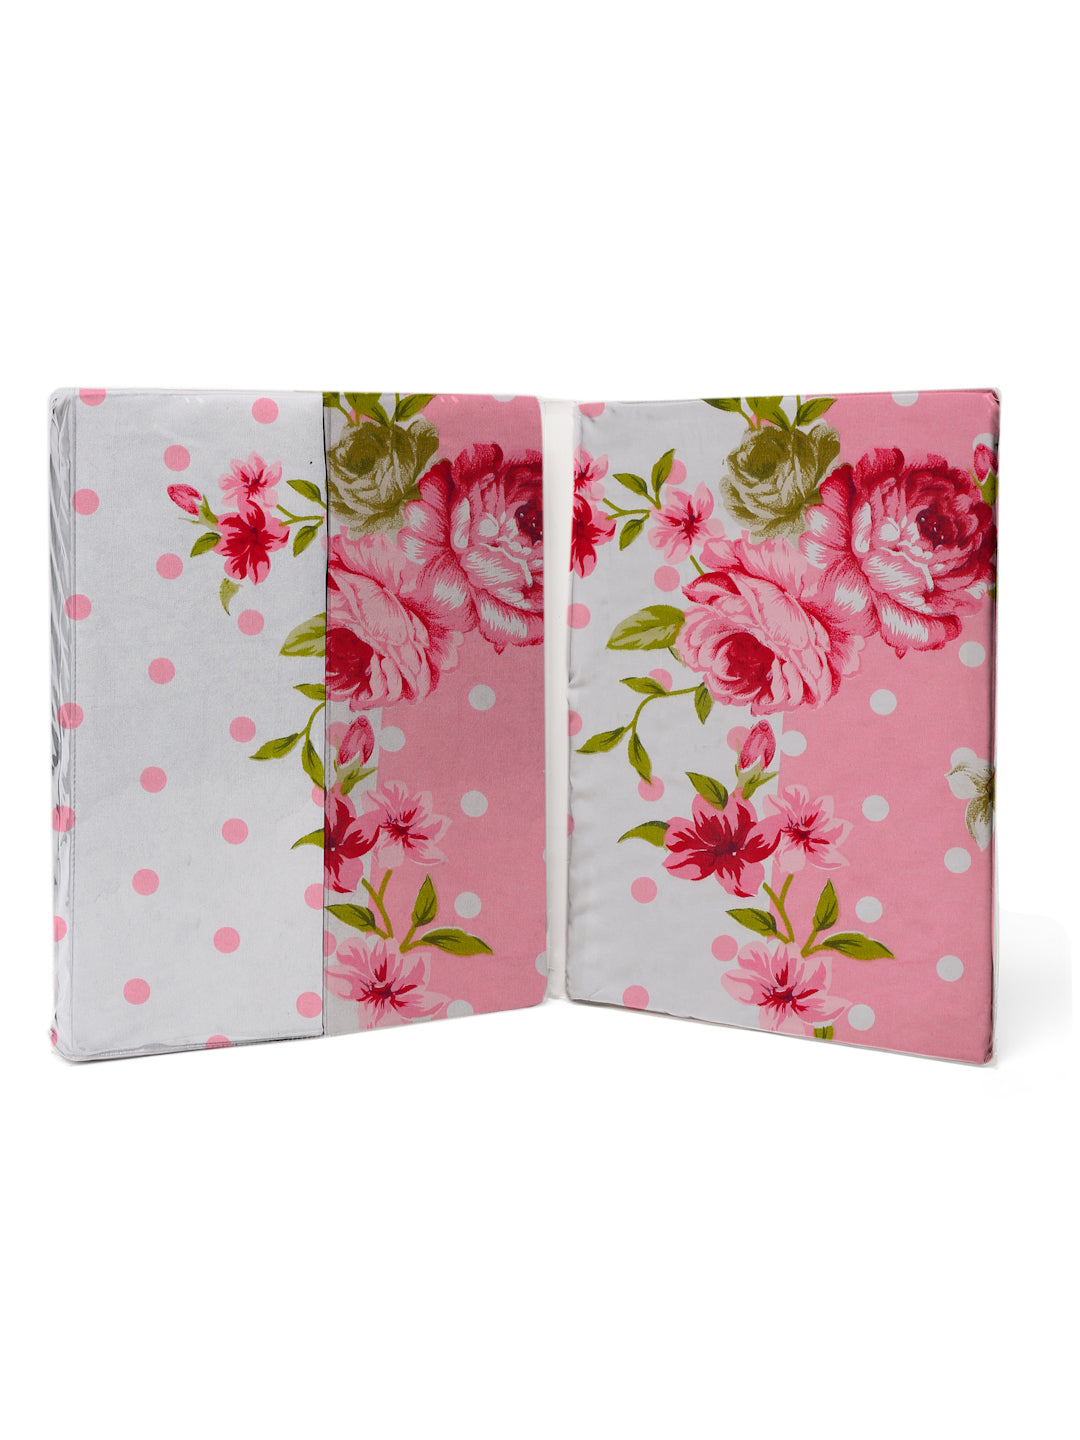 Klotthe Pink Floral 300 TC Cotton Blend Elasticated Double Bedsheet Set in Book Fold Packing